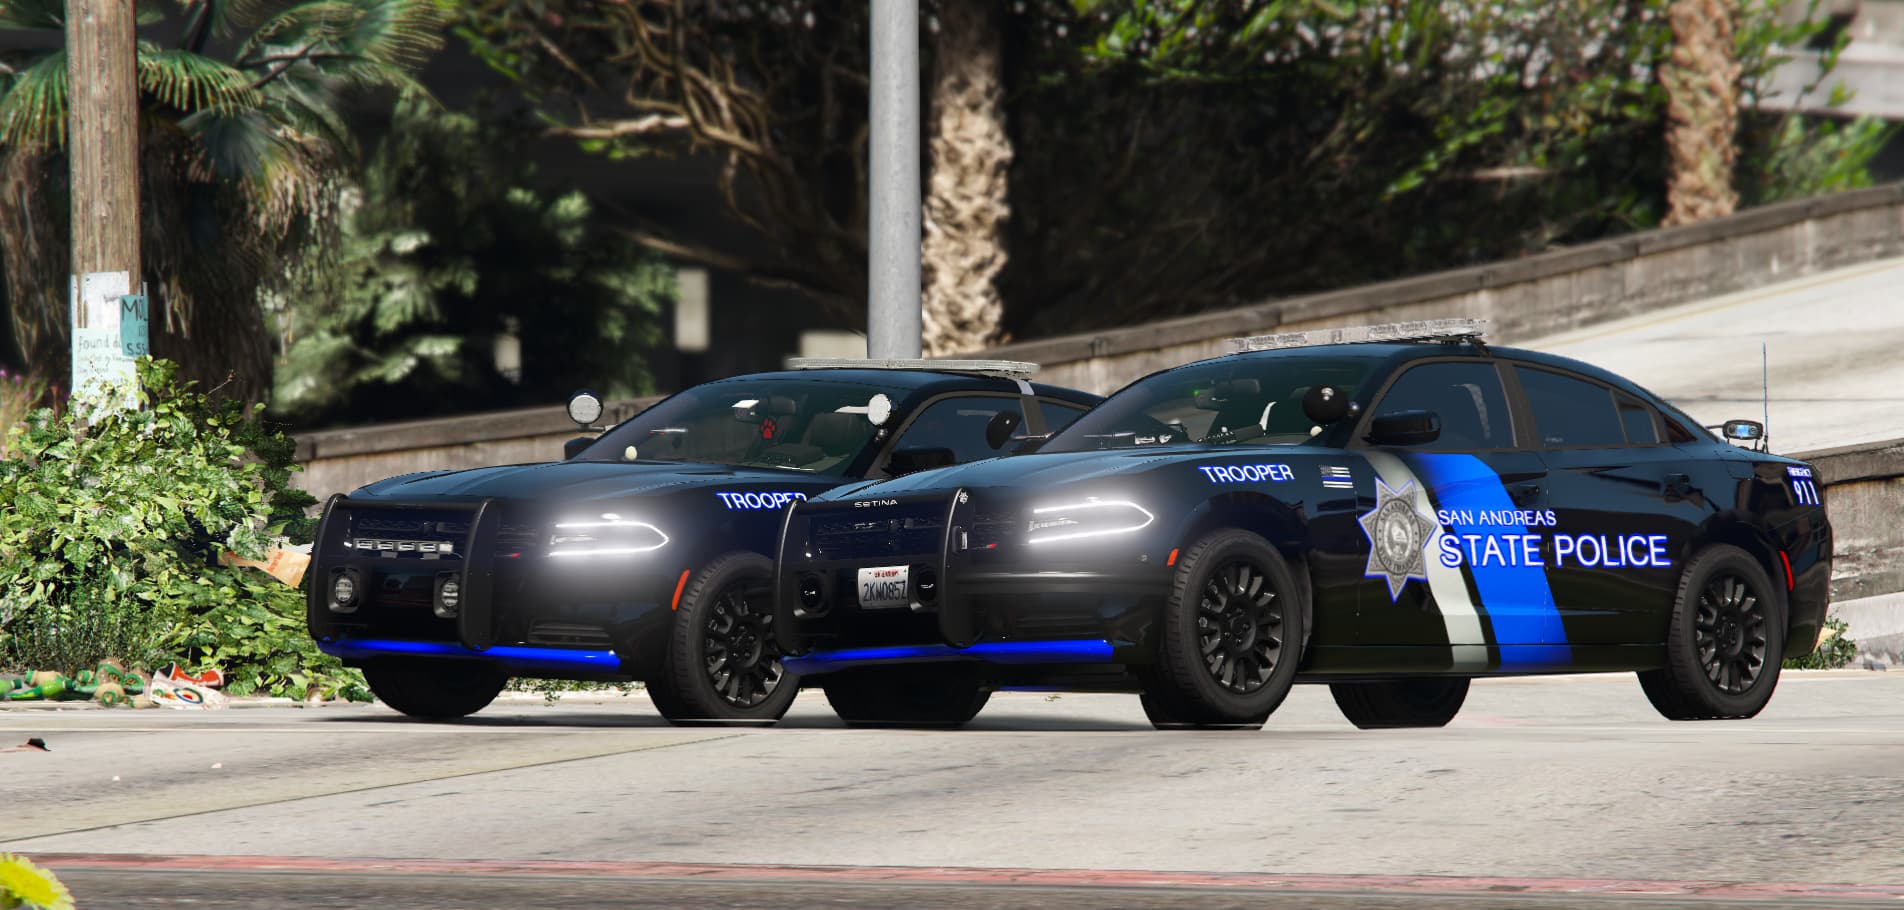 Your RP Destiny: Join YVRP Los Santos County Sheriff's Office Today!  Calling All Deputies - Newbies & Pros! Secure Your Spot on the [QBCore]  Server! [Active 24/7] [Whitelisted] : r/GTA5Roleplay